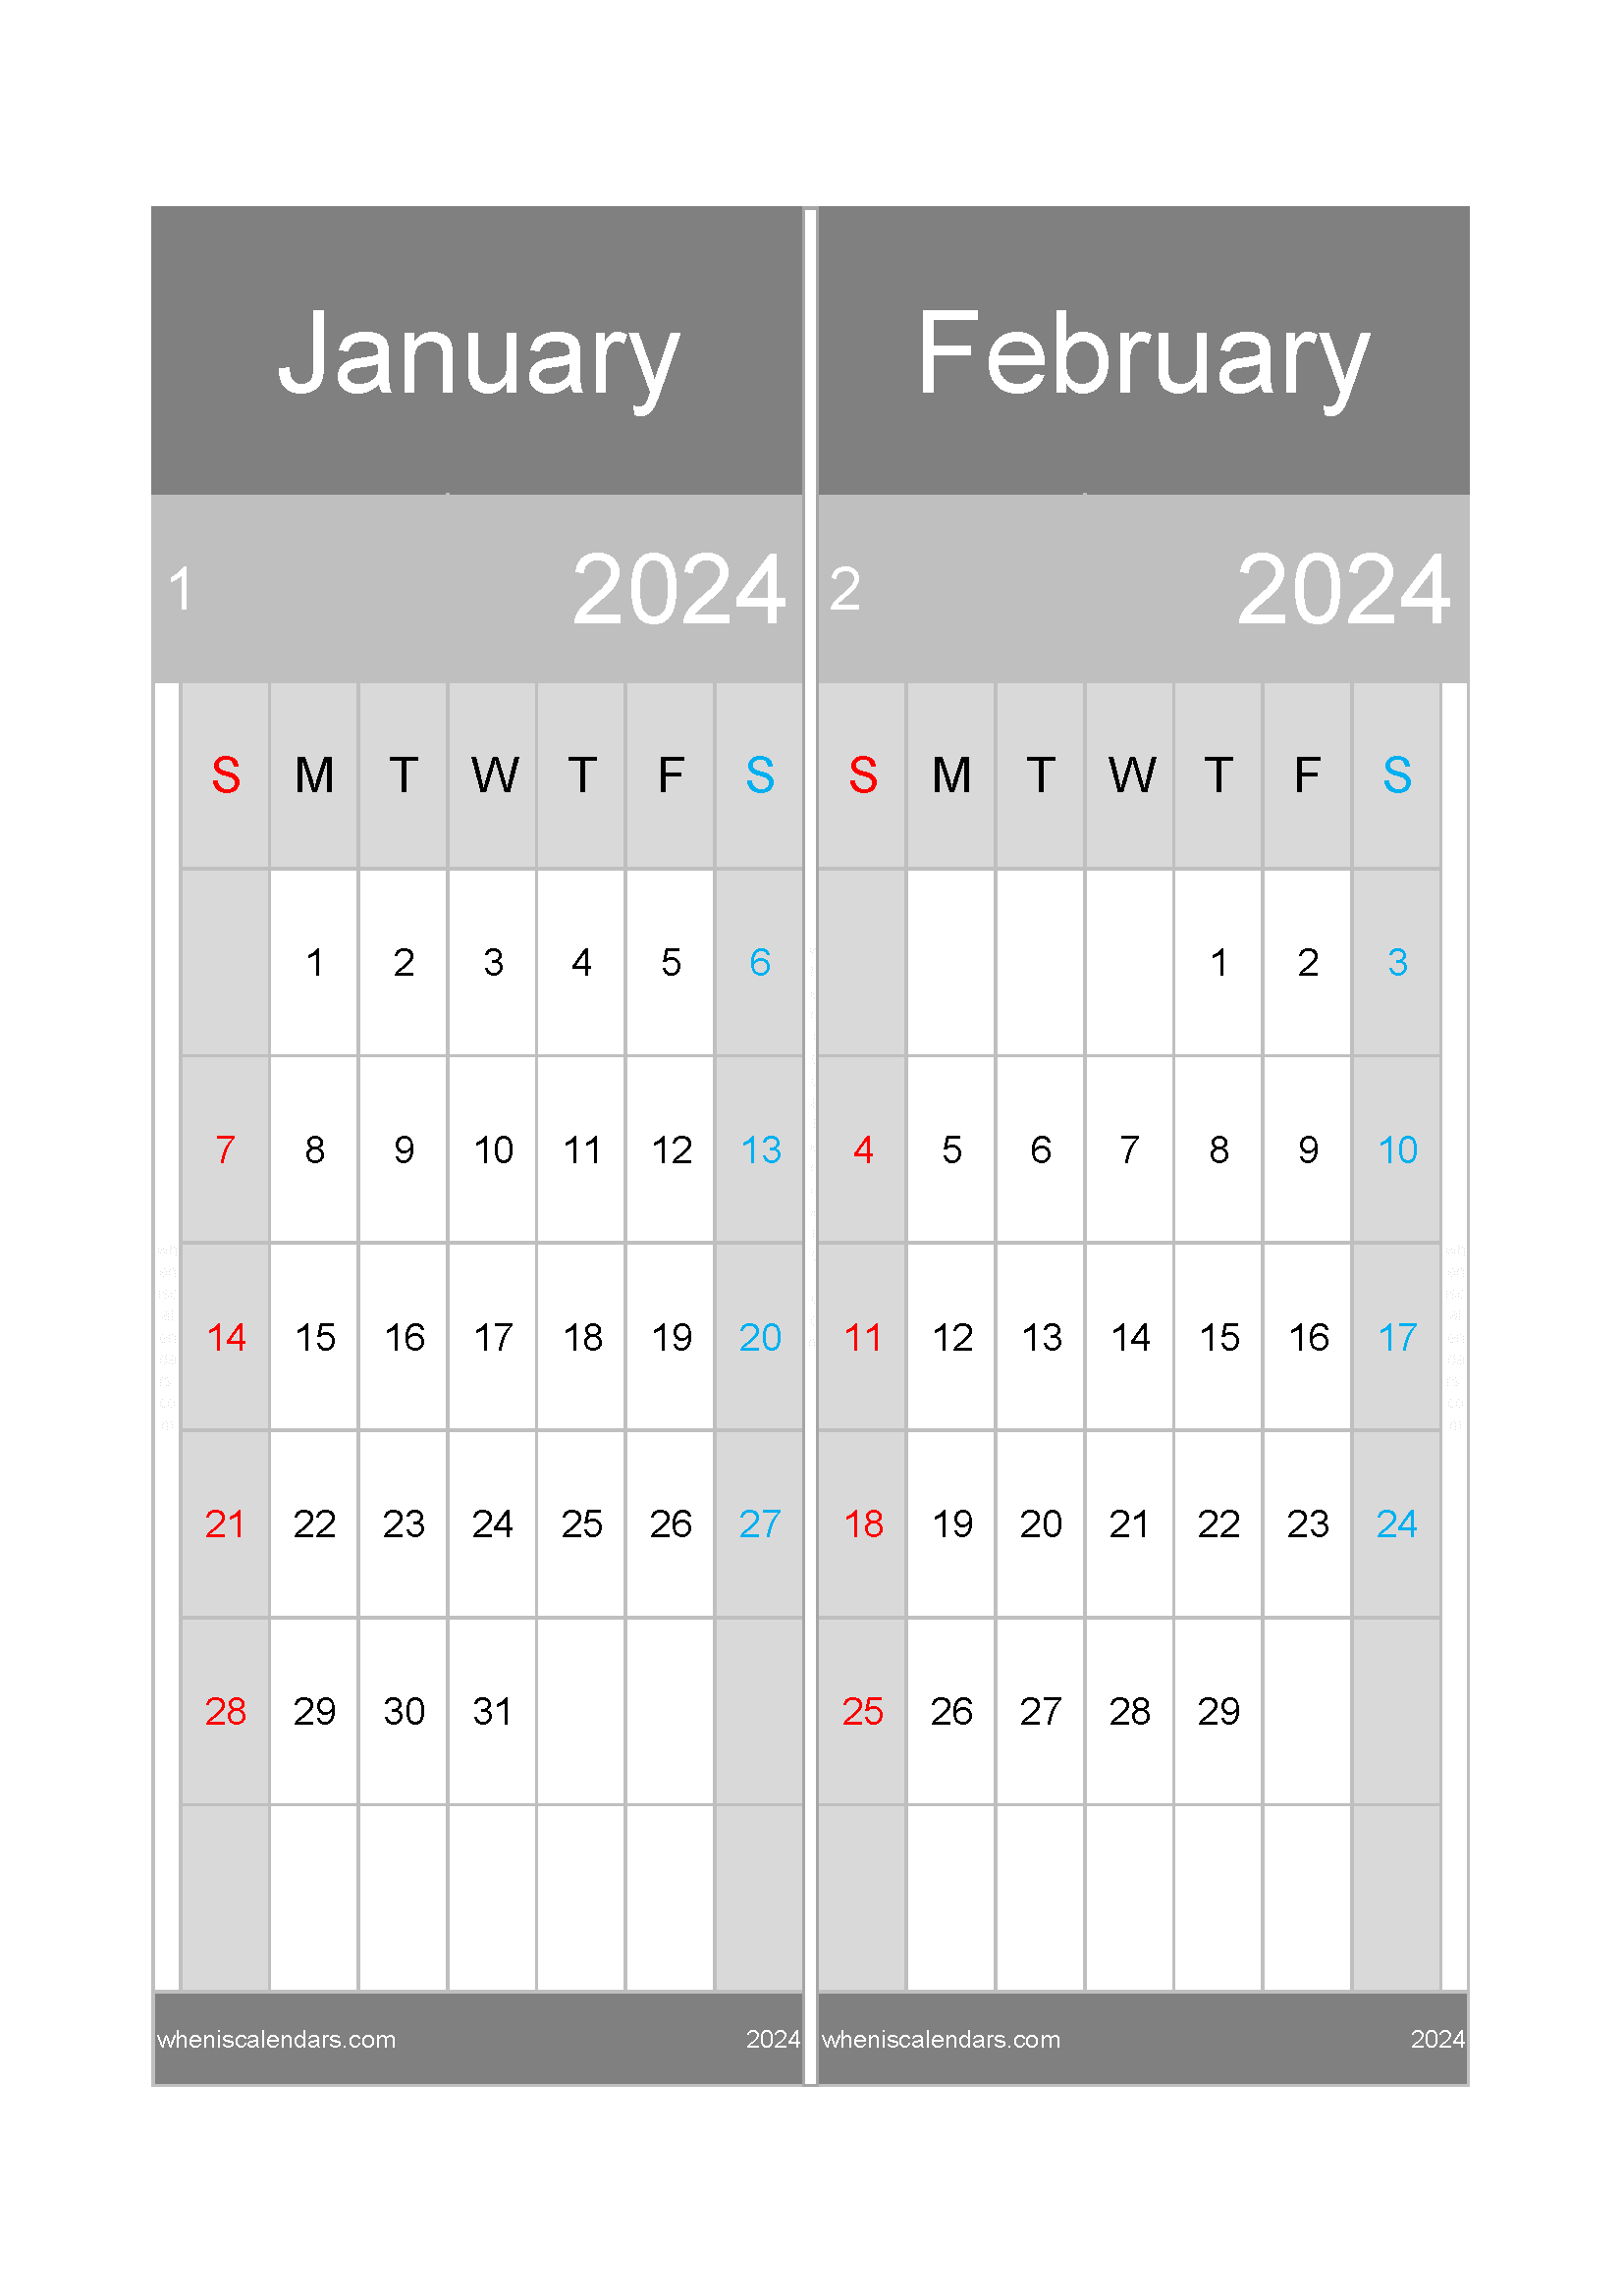 Calendar January and February 2024 Two-Month